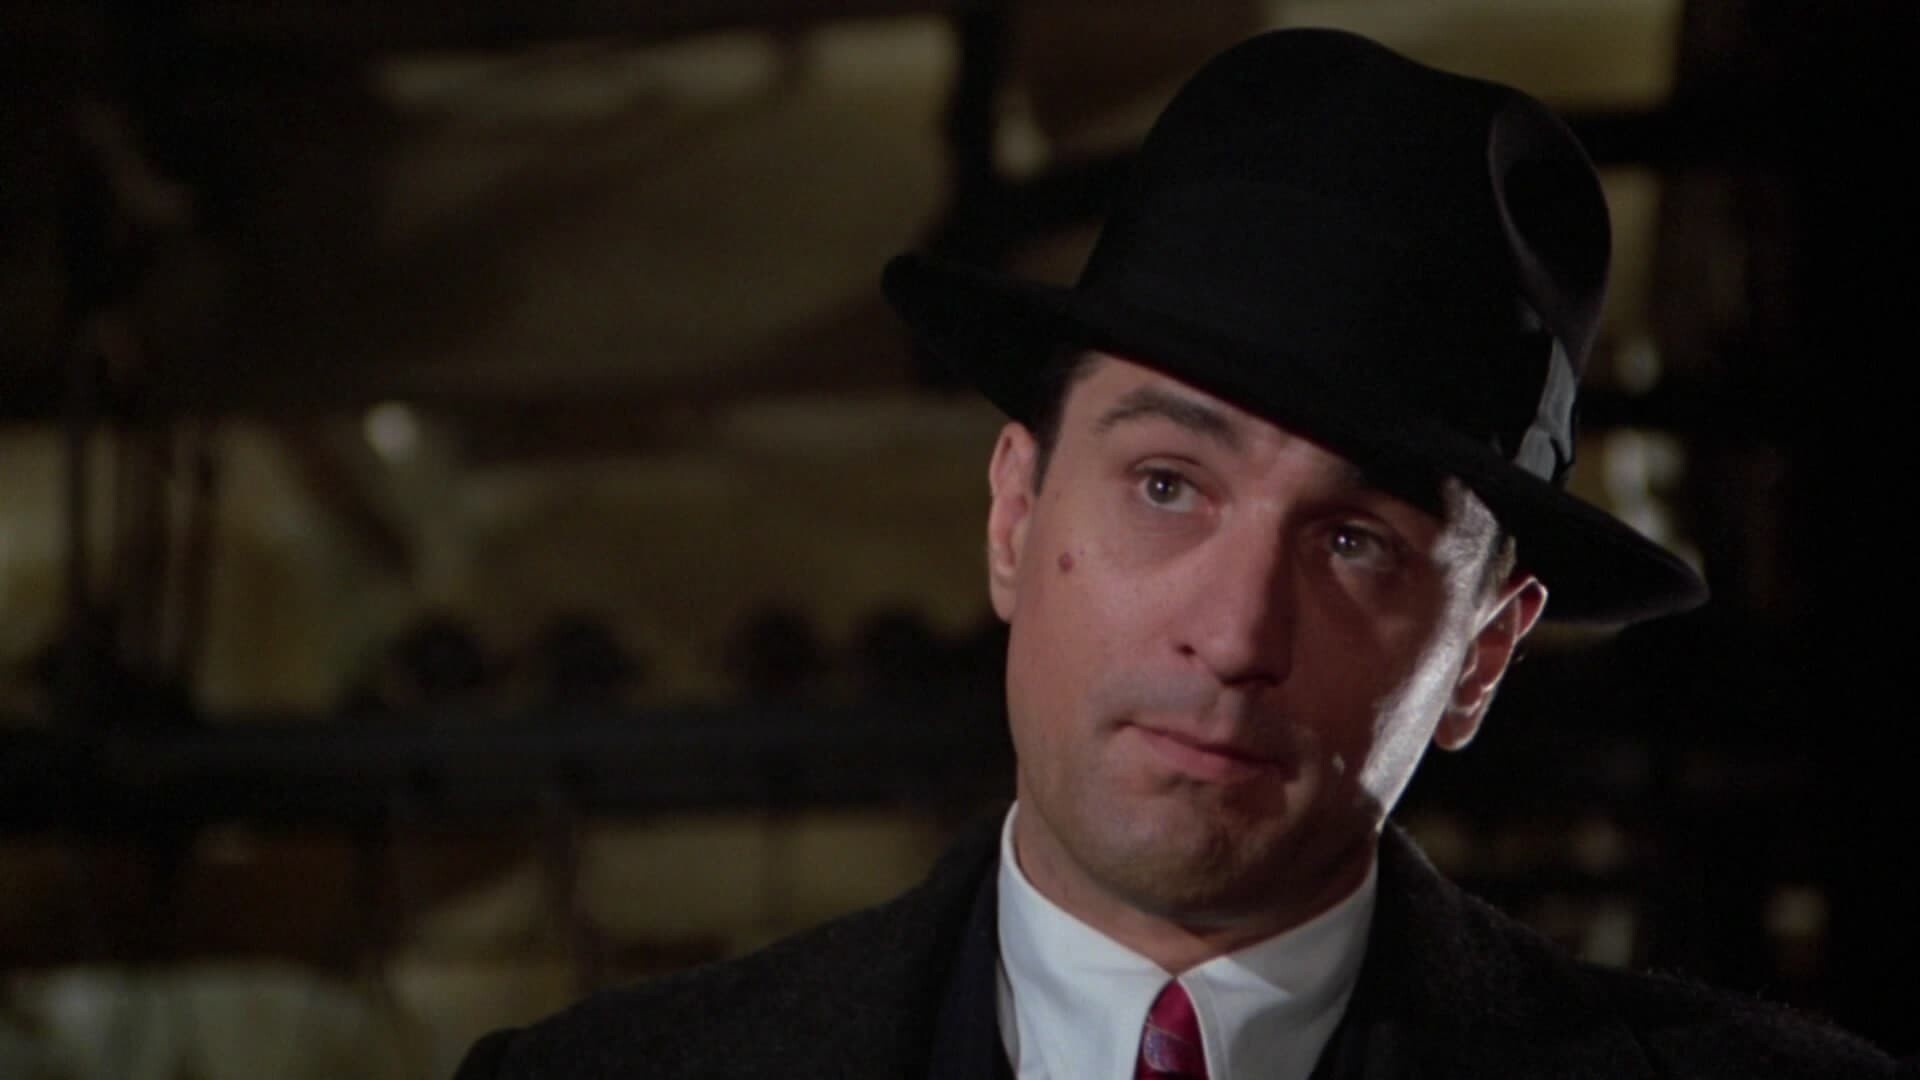 Once Upon a Time in America: Robert De Niro as David "Noodles" Aaronson, 1984 movie. 1920x1080 Full HD Background.